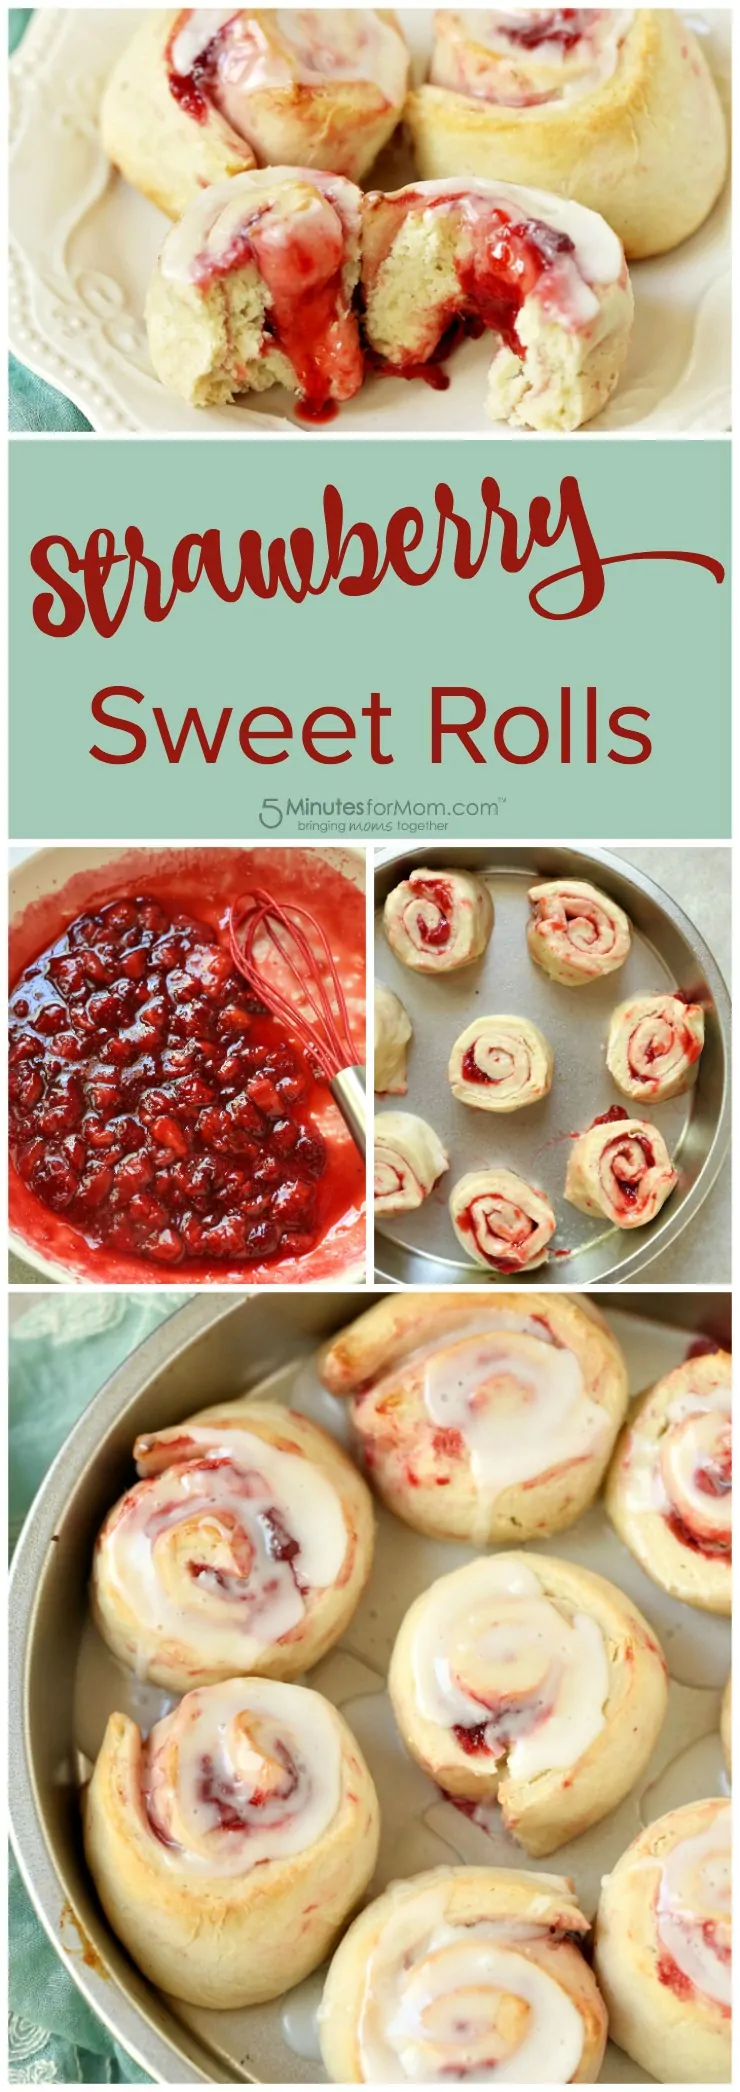 How to Make Strawberry Sweet Rolls